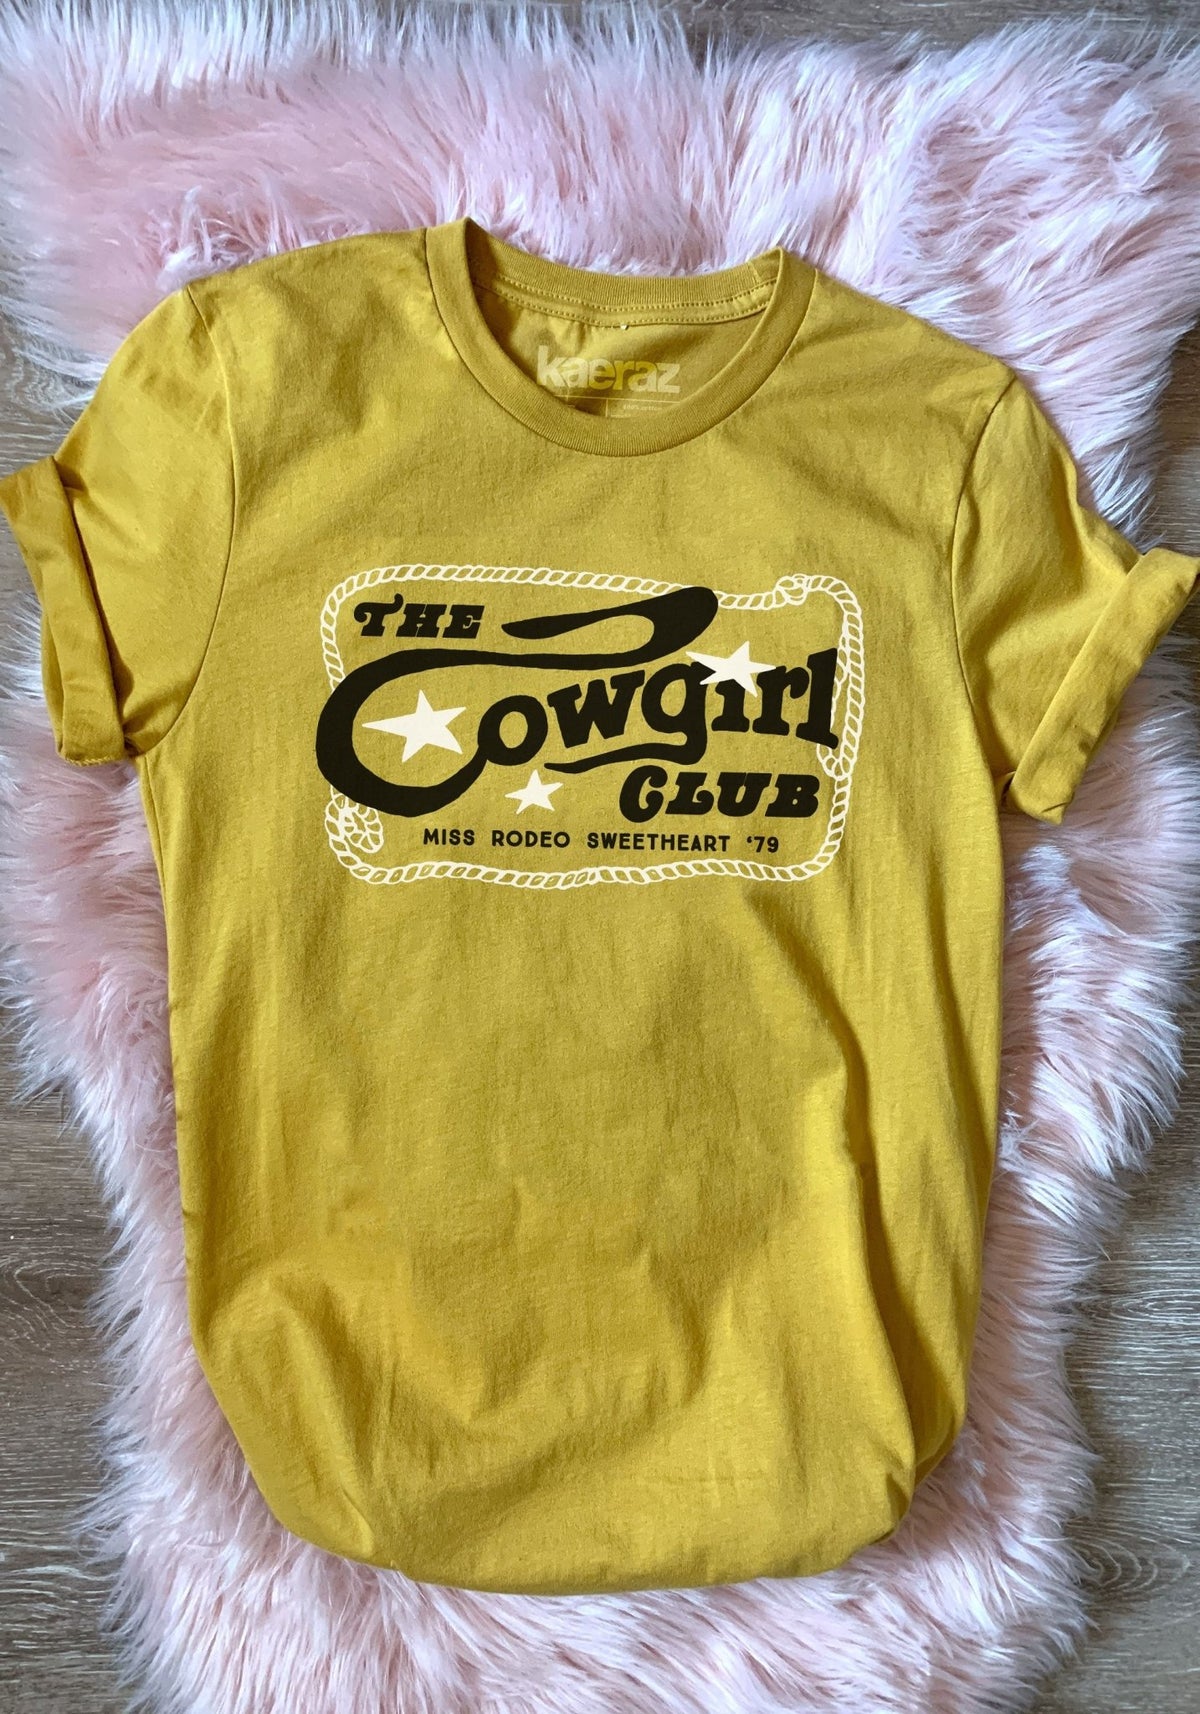 The Cowgirl Club Tee by kaeraz 70s country cowboy